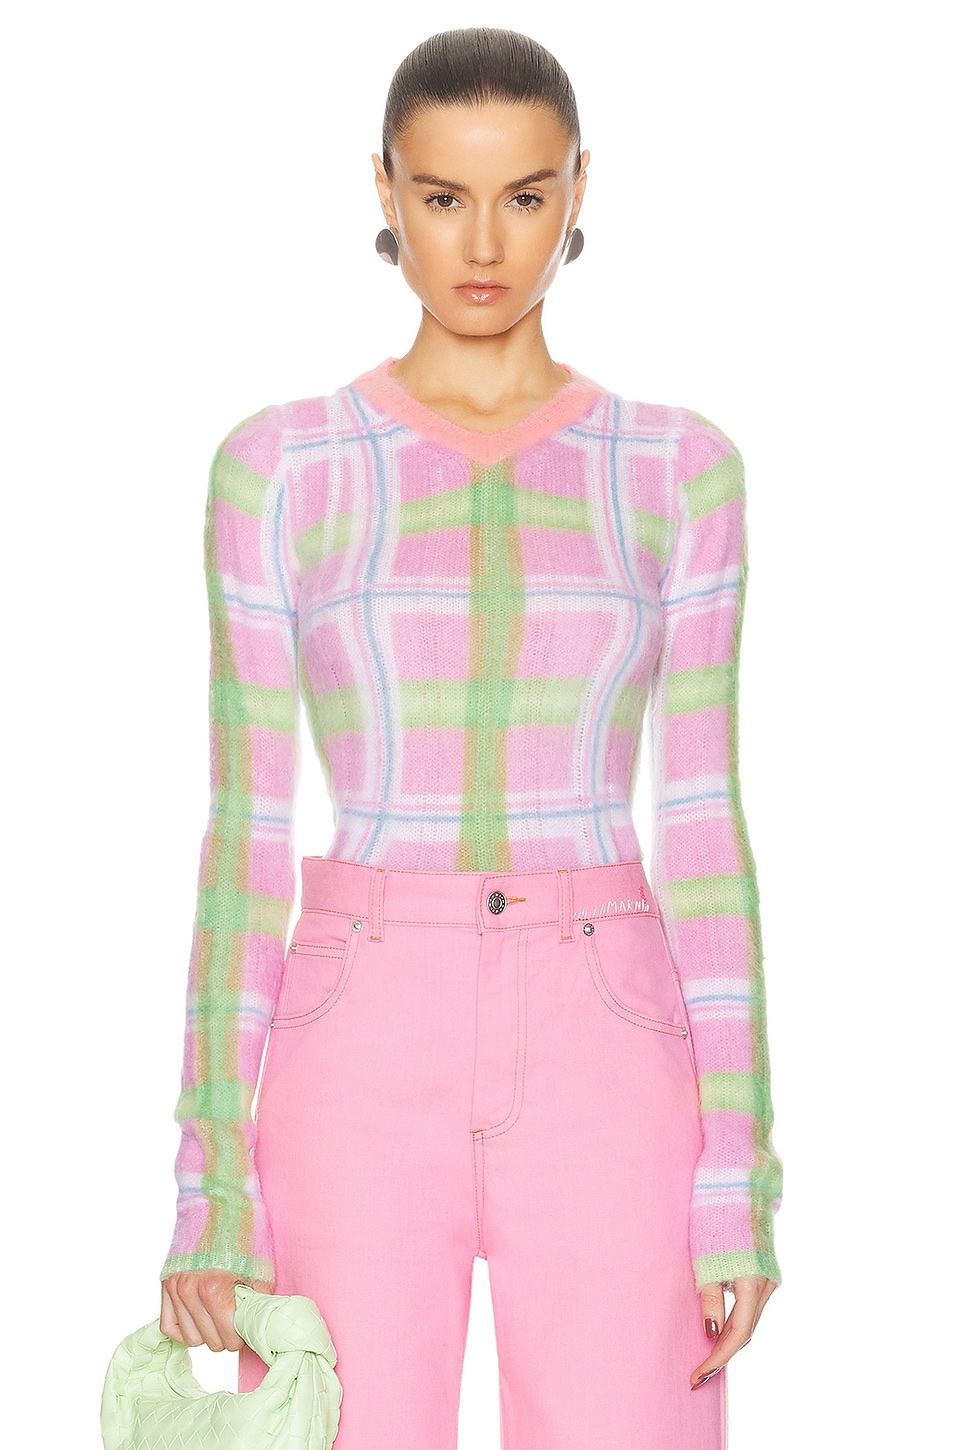 Image 1 of Marni V Neck Sweater in Pink Gummy